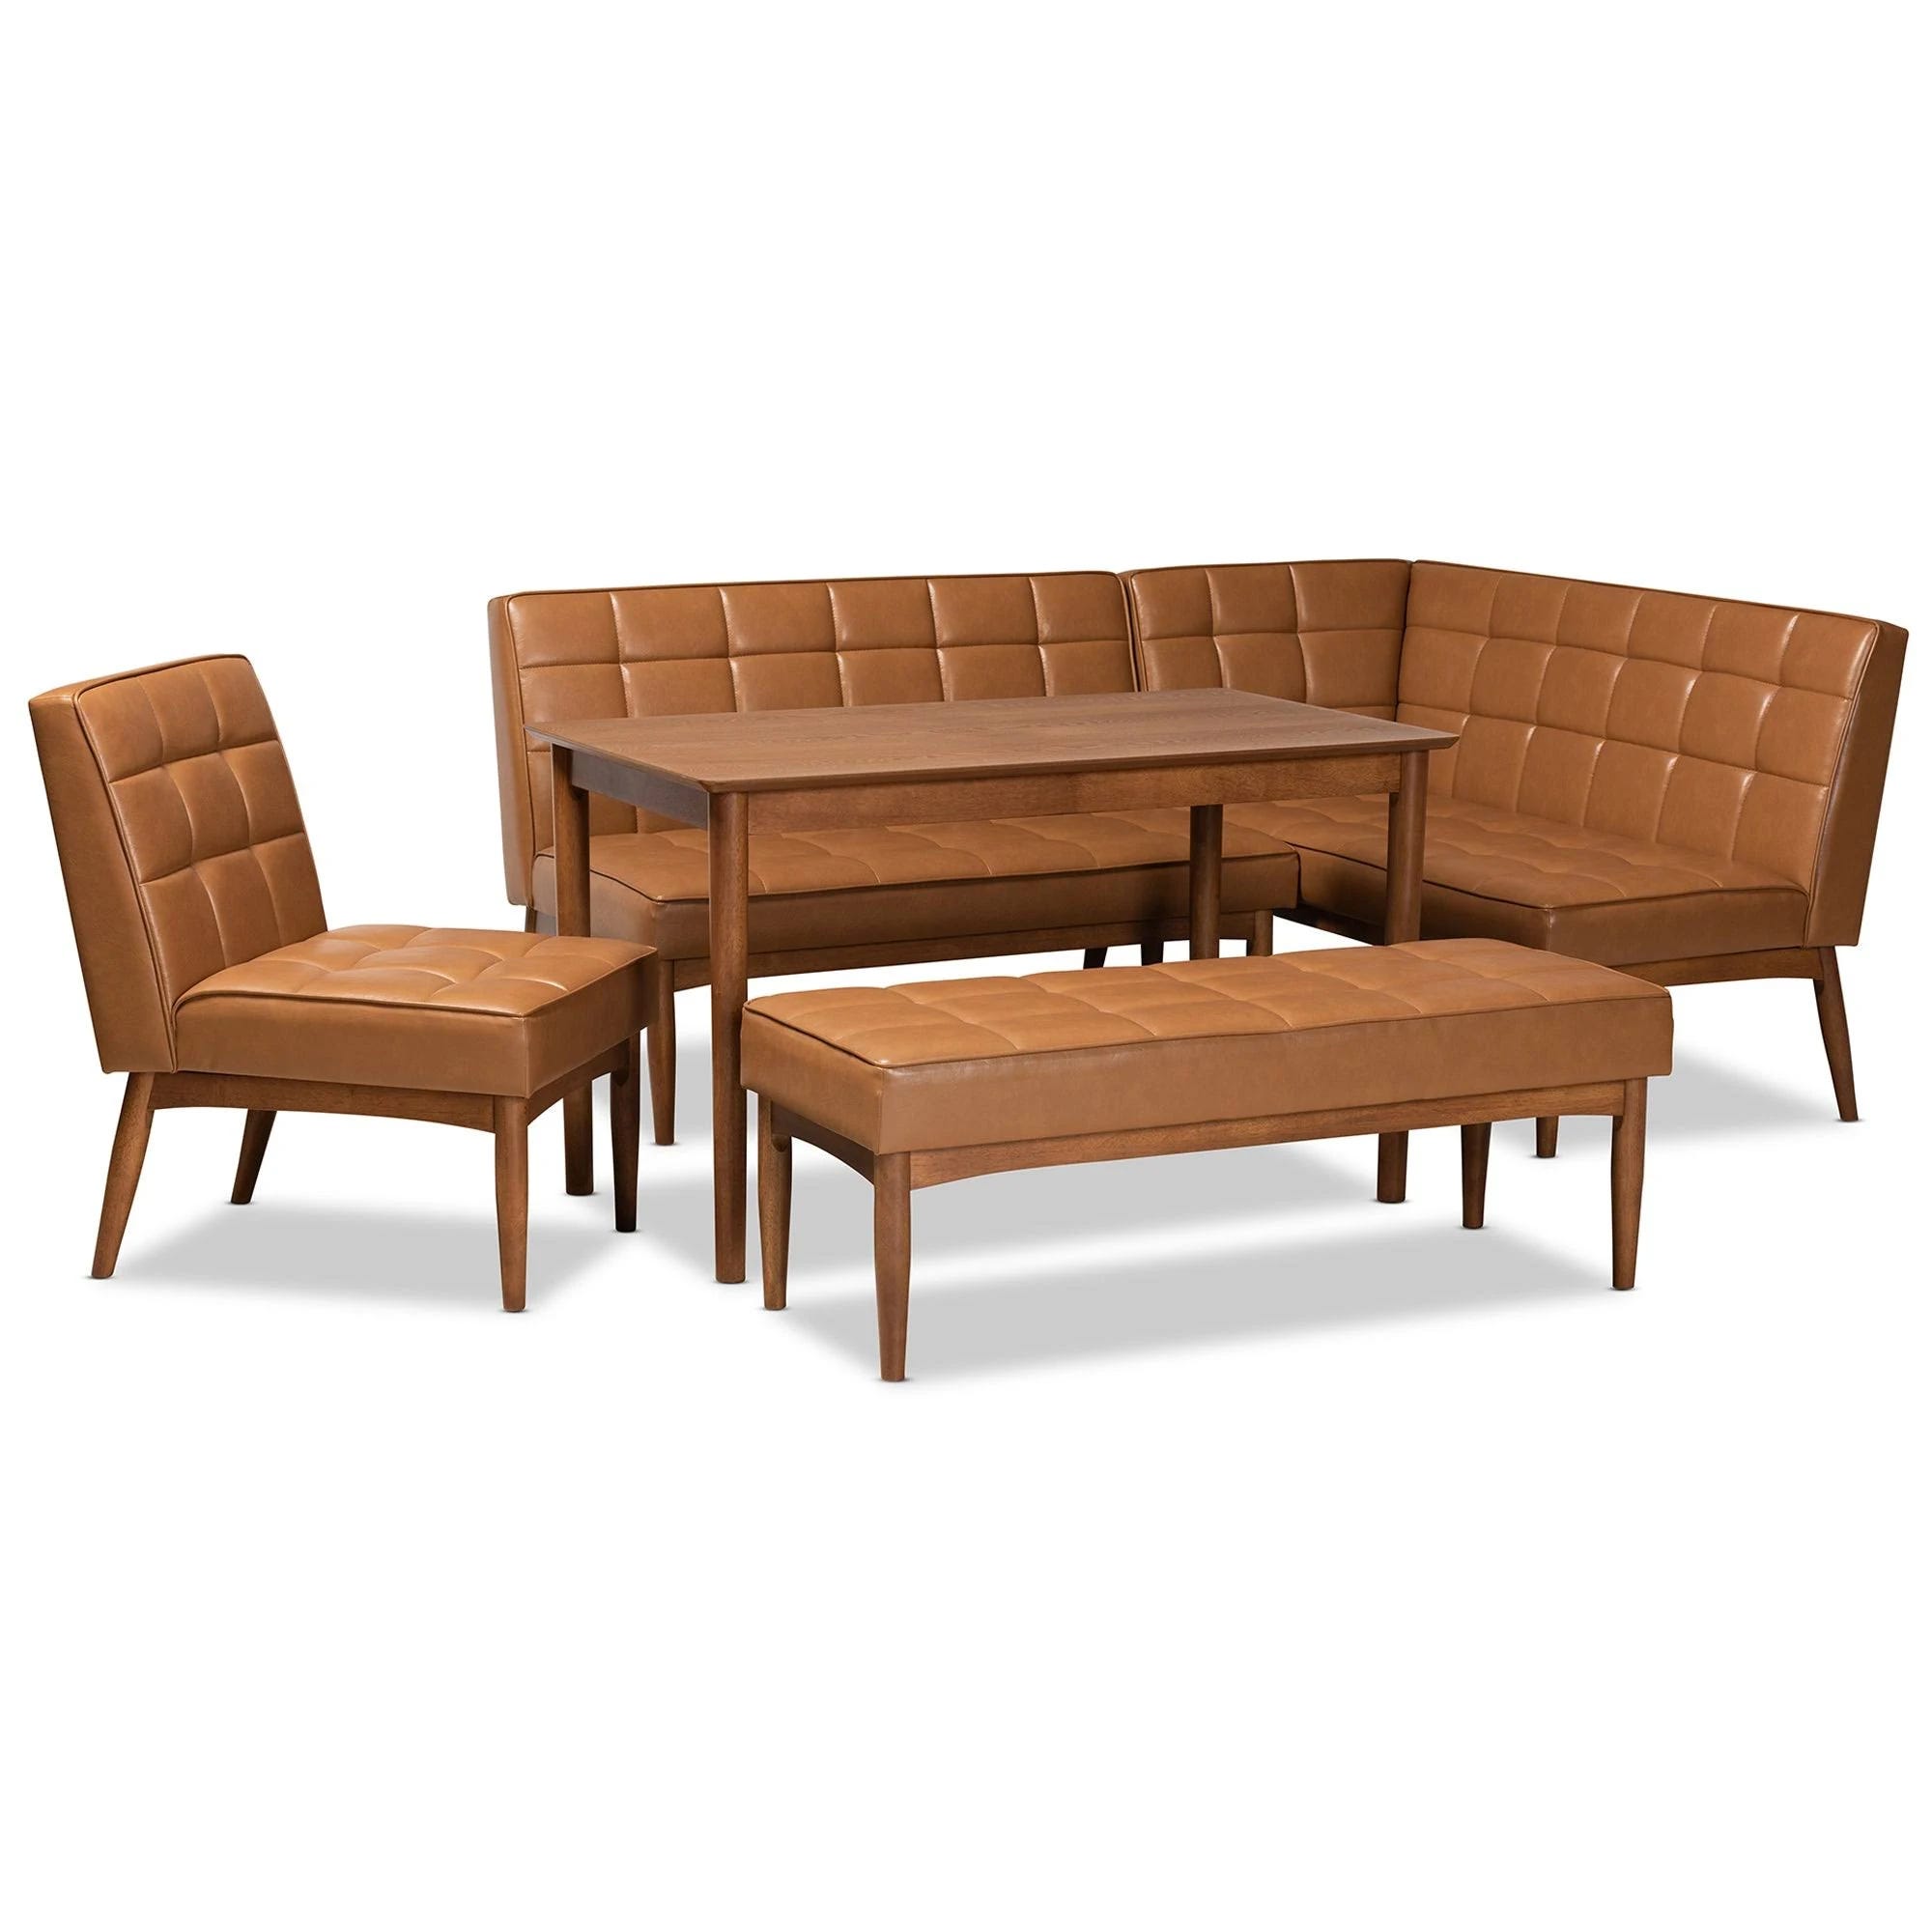 Mid-Century Modern Breakfast Nook Set with Tan Faux Leather Upholstery and Walnut Brown Finish | Image